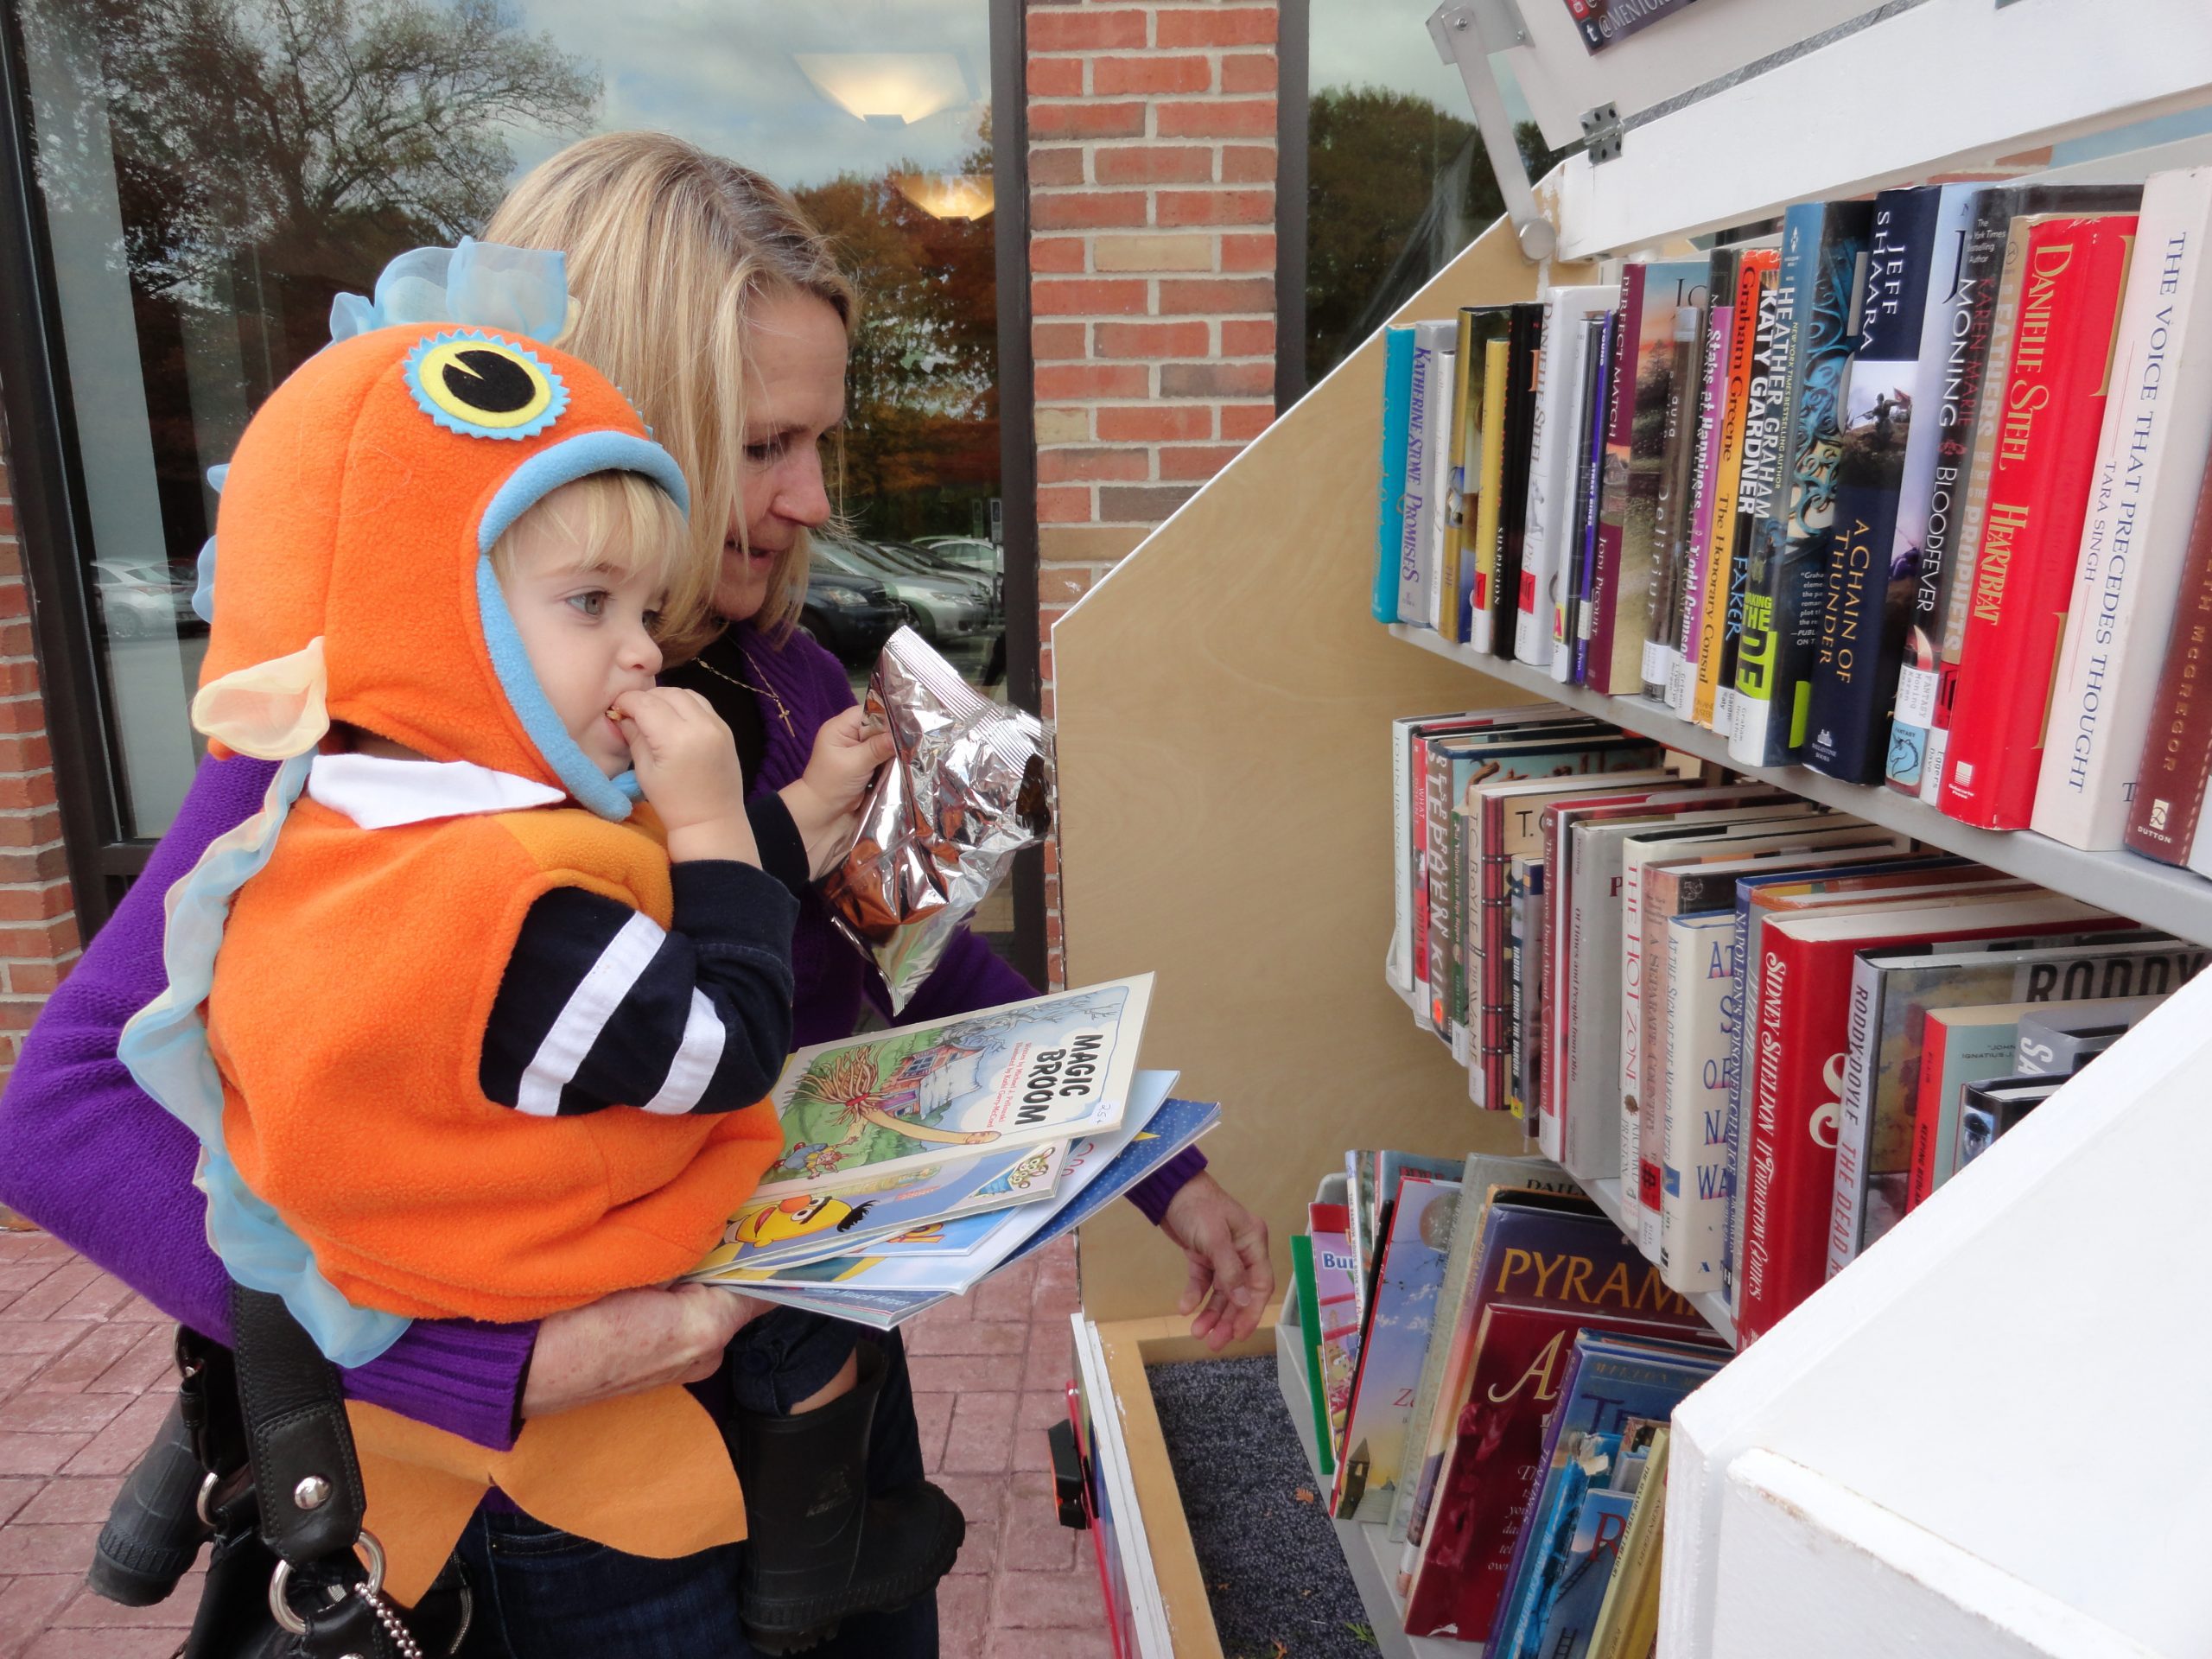 We set up the Pop-Up Library on Halloween, so costumed children could leave with more than candy.